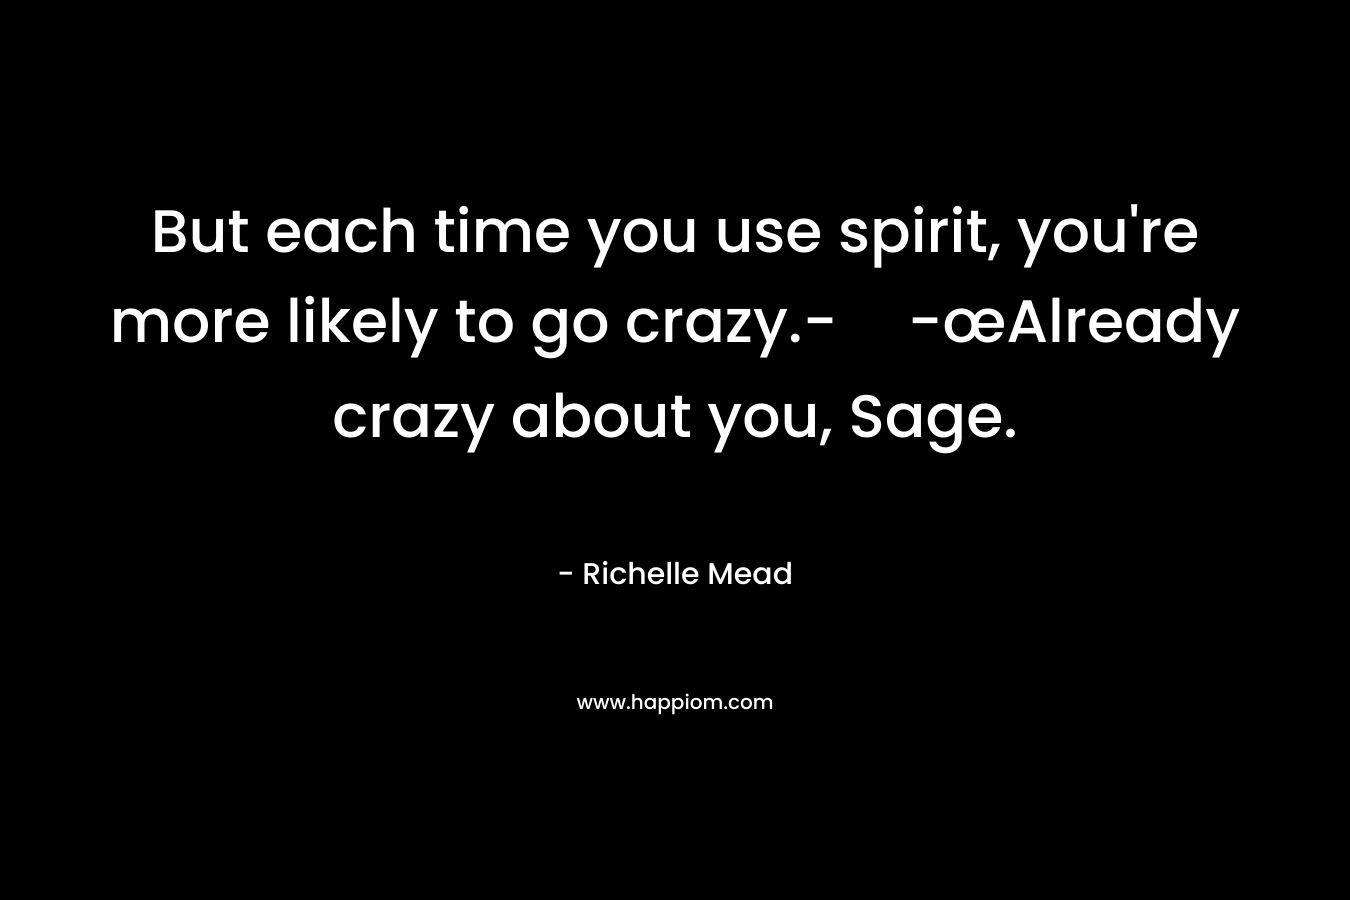 But each time you use spirit, you're more likely to go crazy.--œAlready crazy about you, Sage.